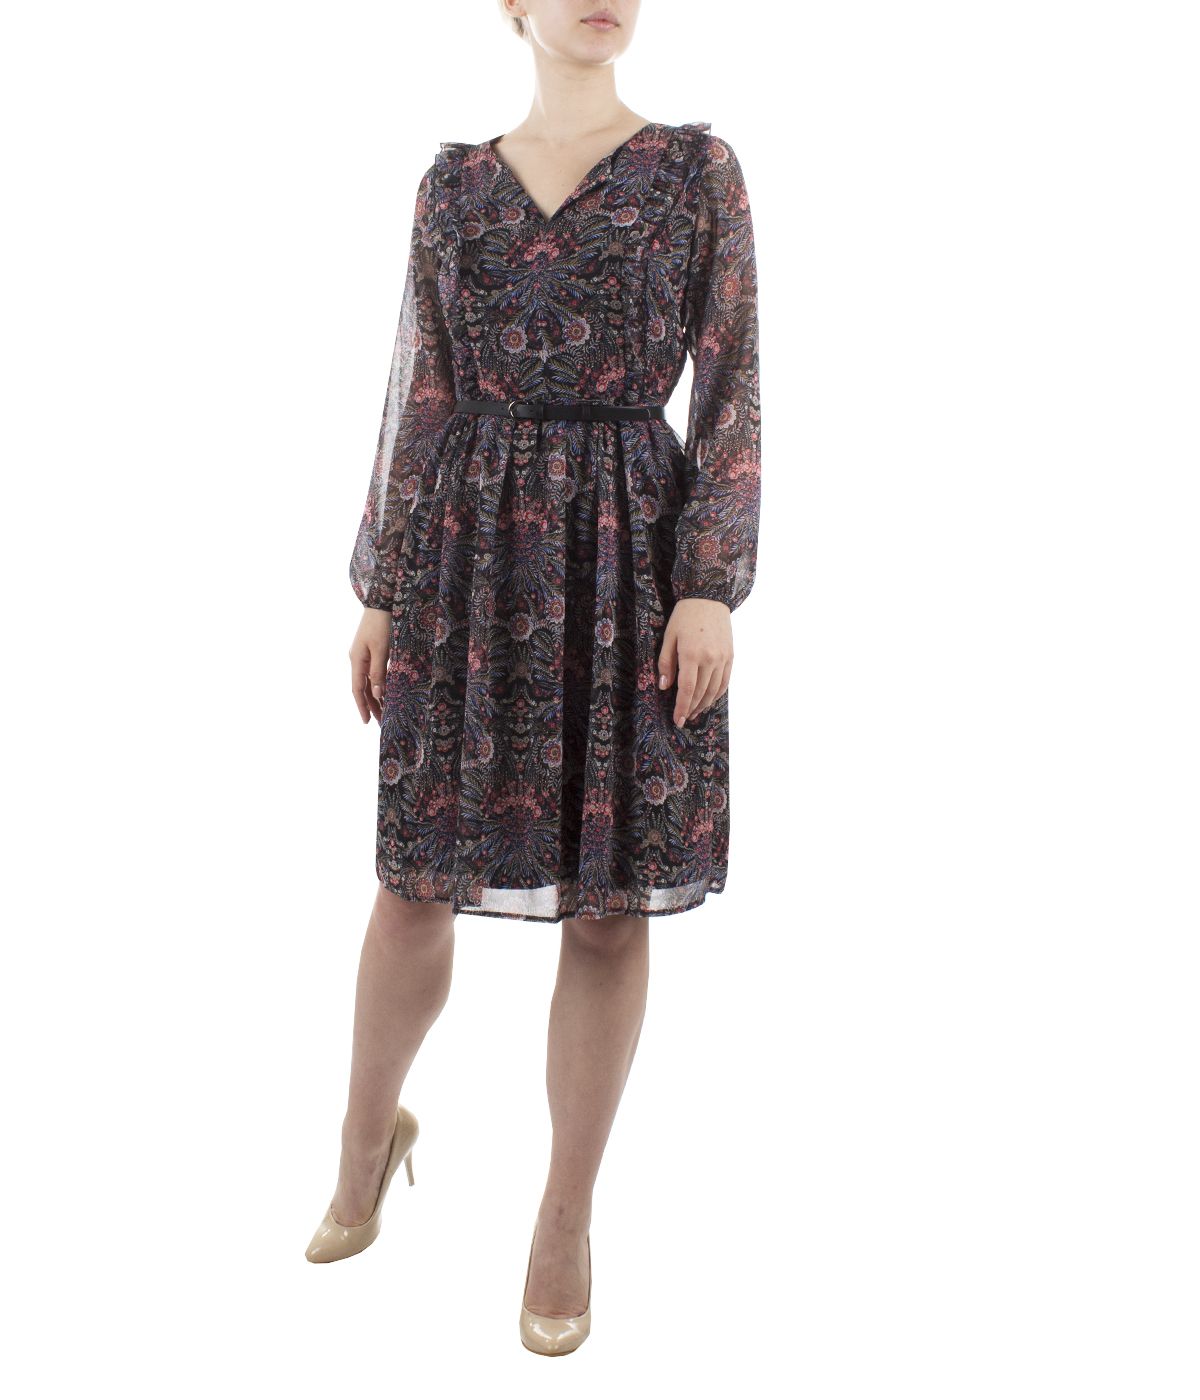 Chiffon dress with long sleeves, emphasized waist, with paisley print  4